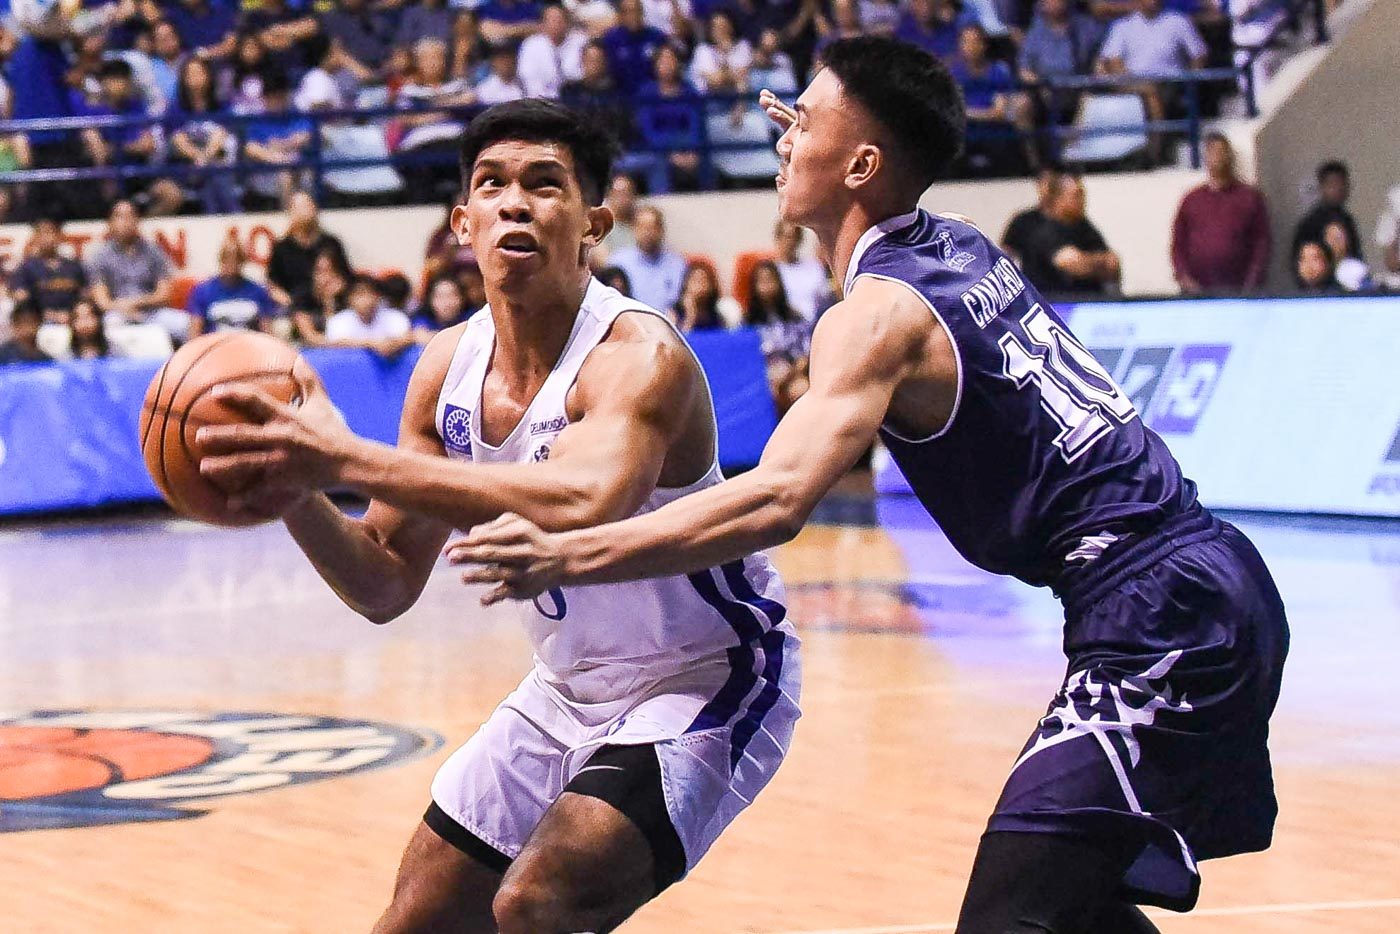 Ateneo gets back at Adamson in defensive shutout